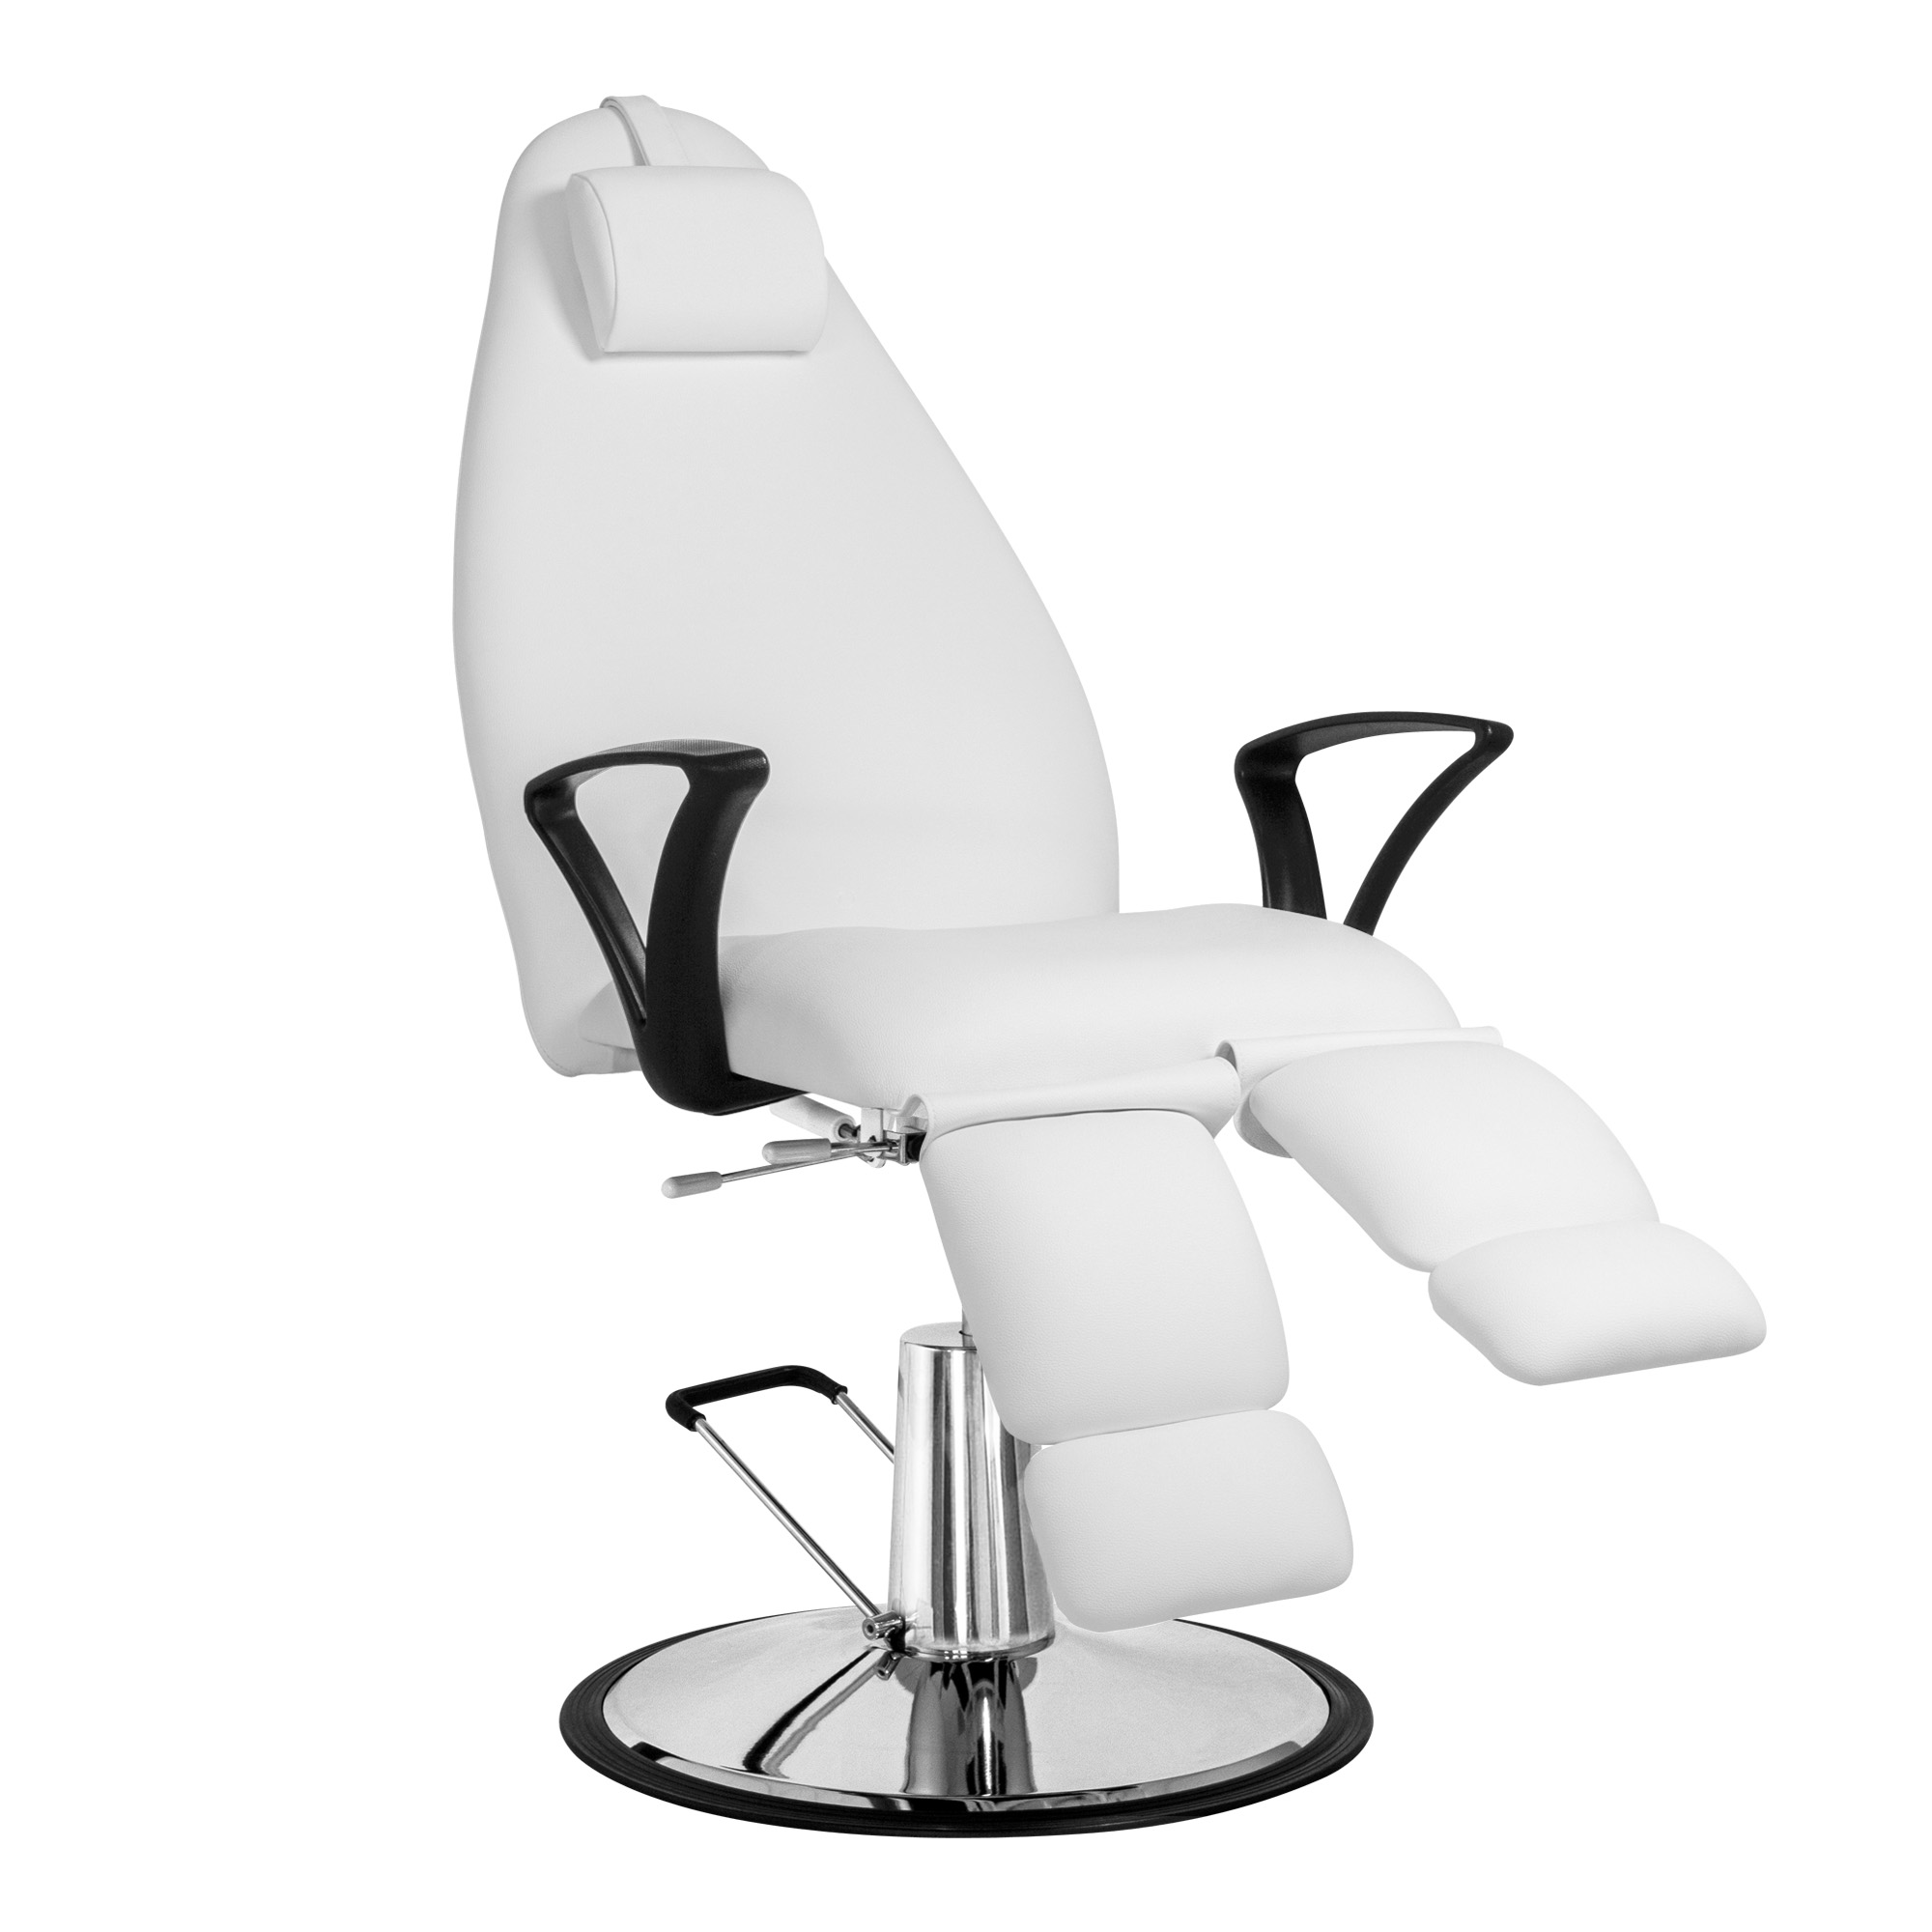 Hydraulic pedicure chair with fixed base white